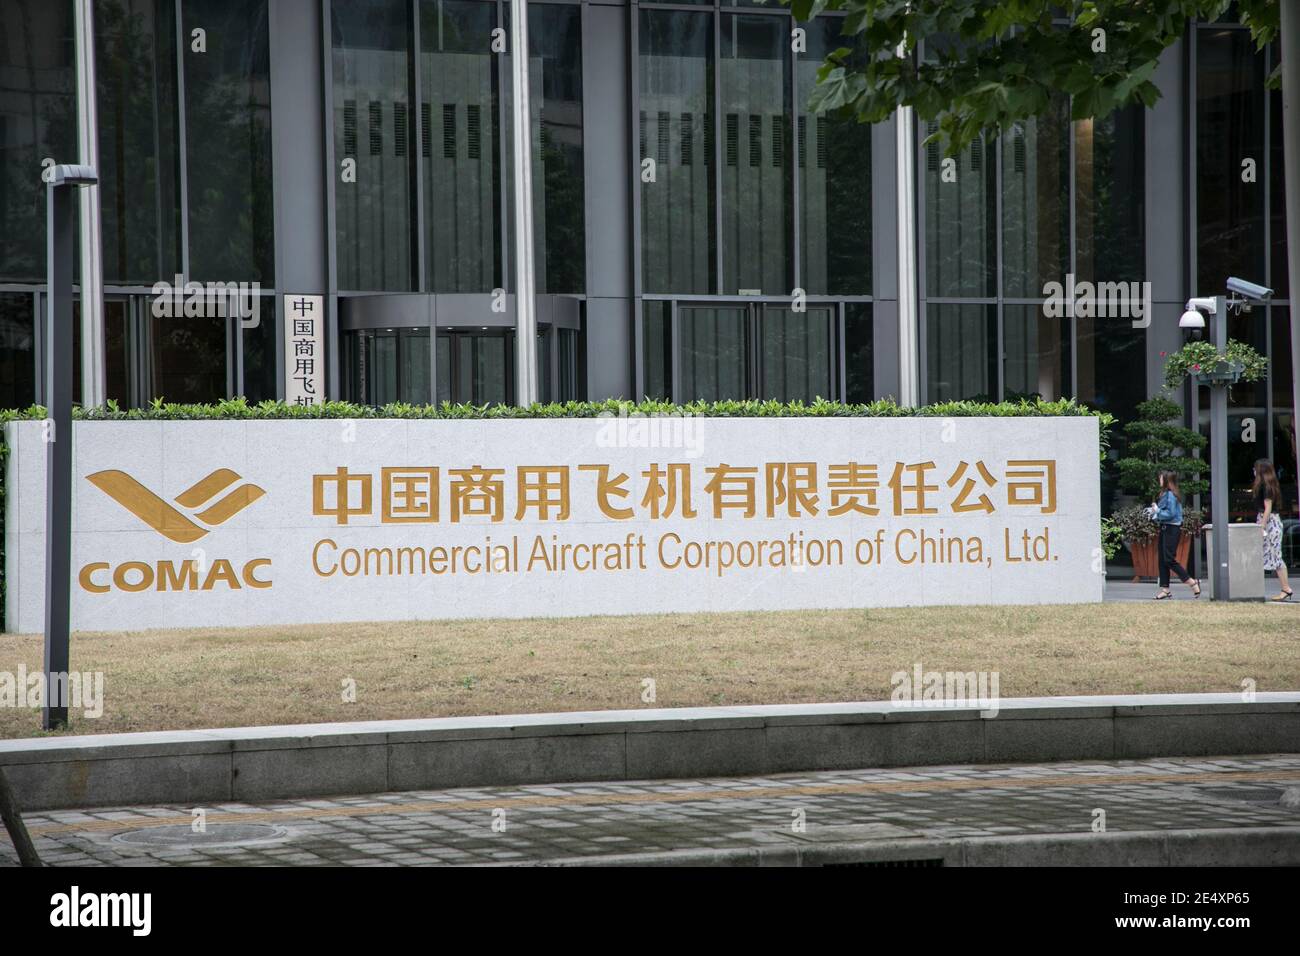 In this unlocated and undated photo, the logo of Comac, the Commercial Aircraft Corporation of China, Ltd., is seen on its edifice. *** Local Caption Stock Photo